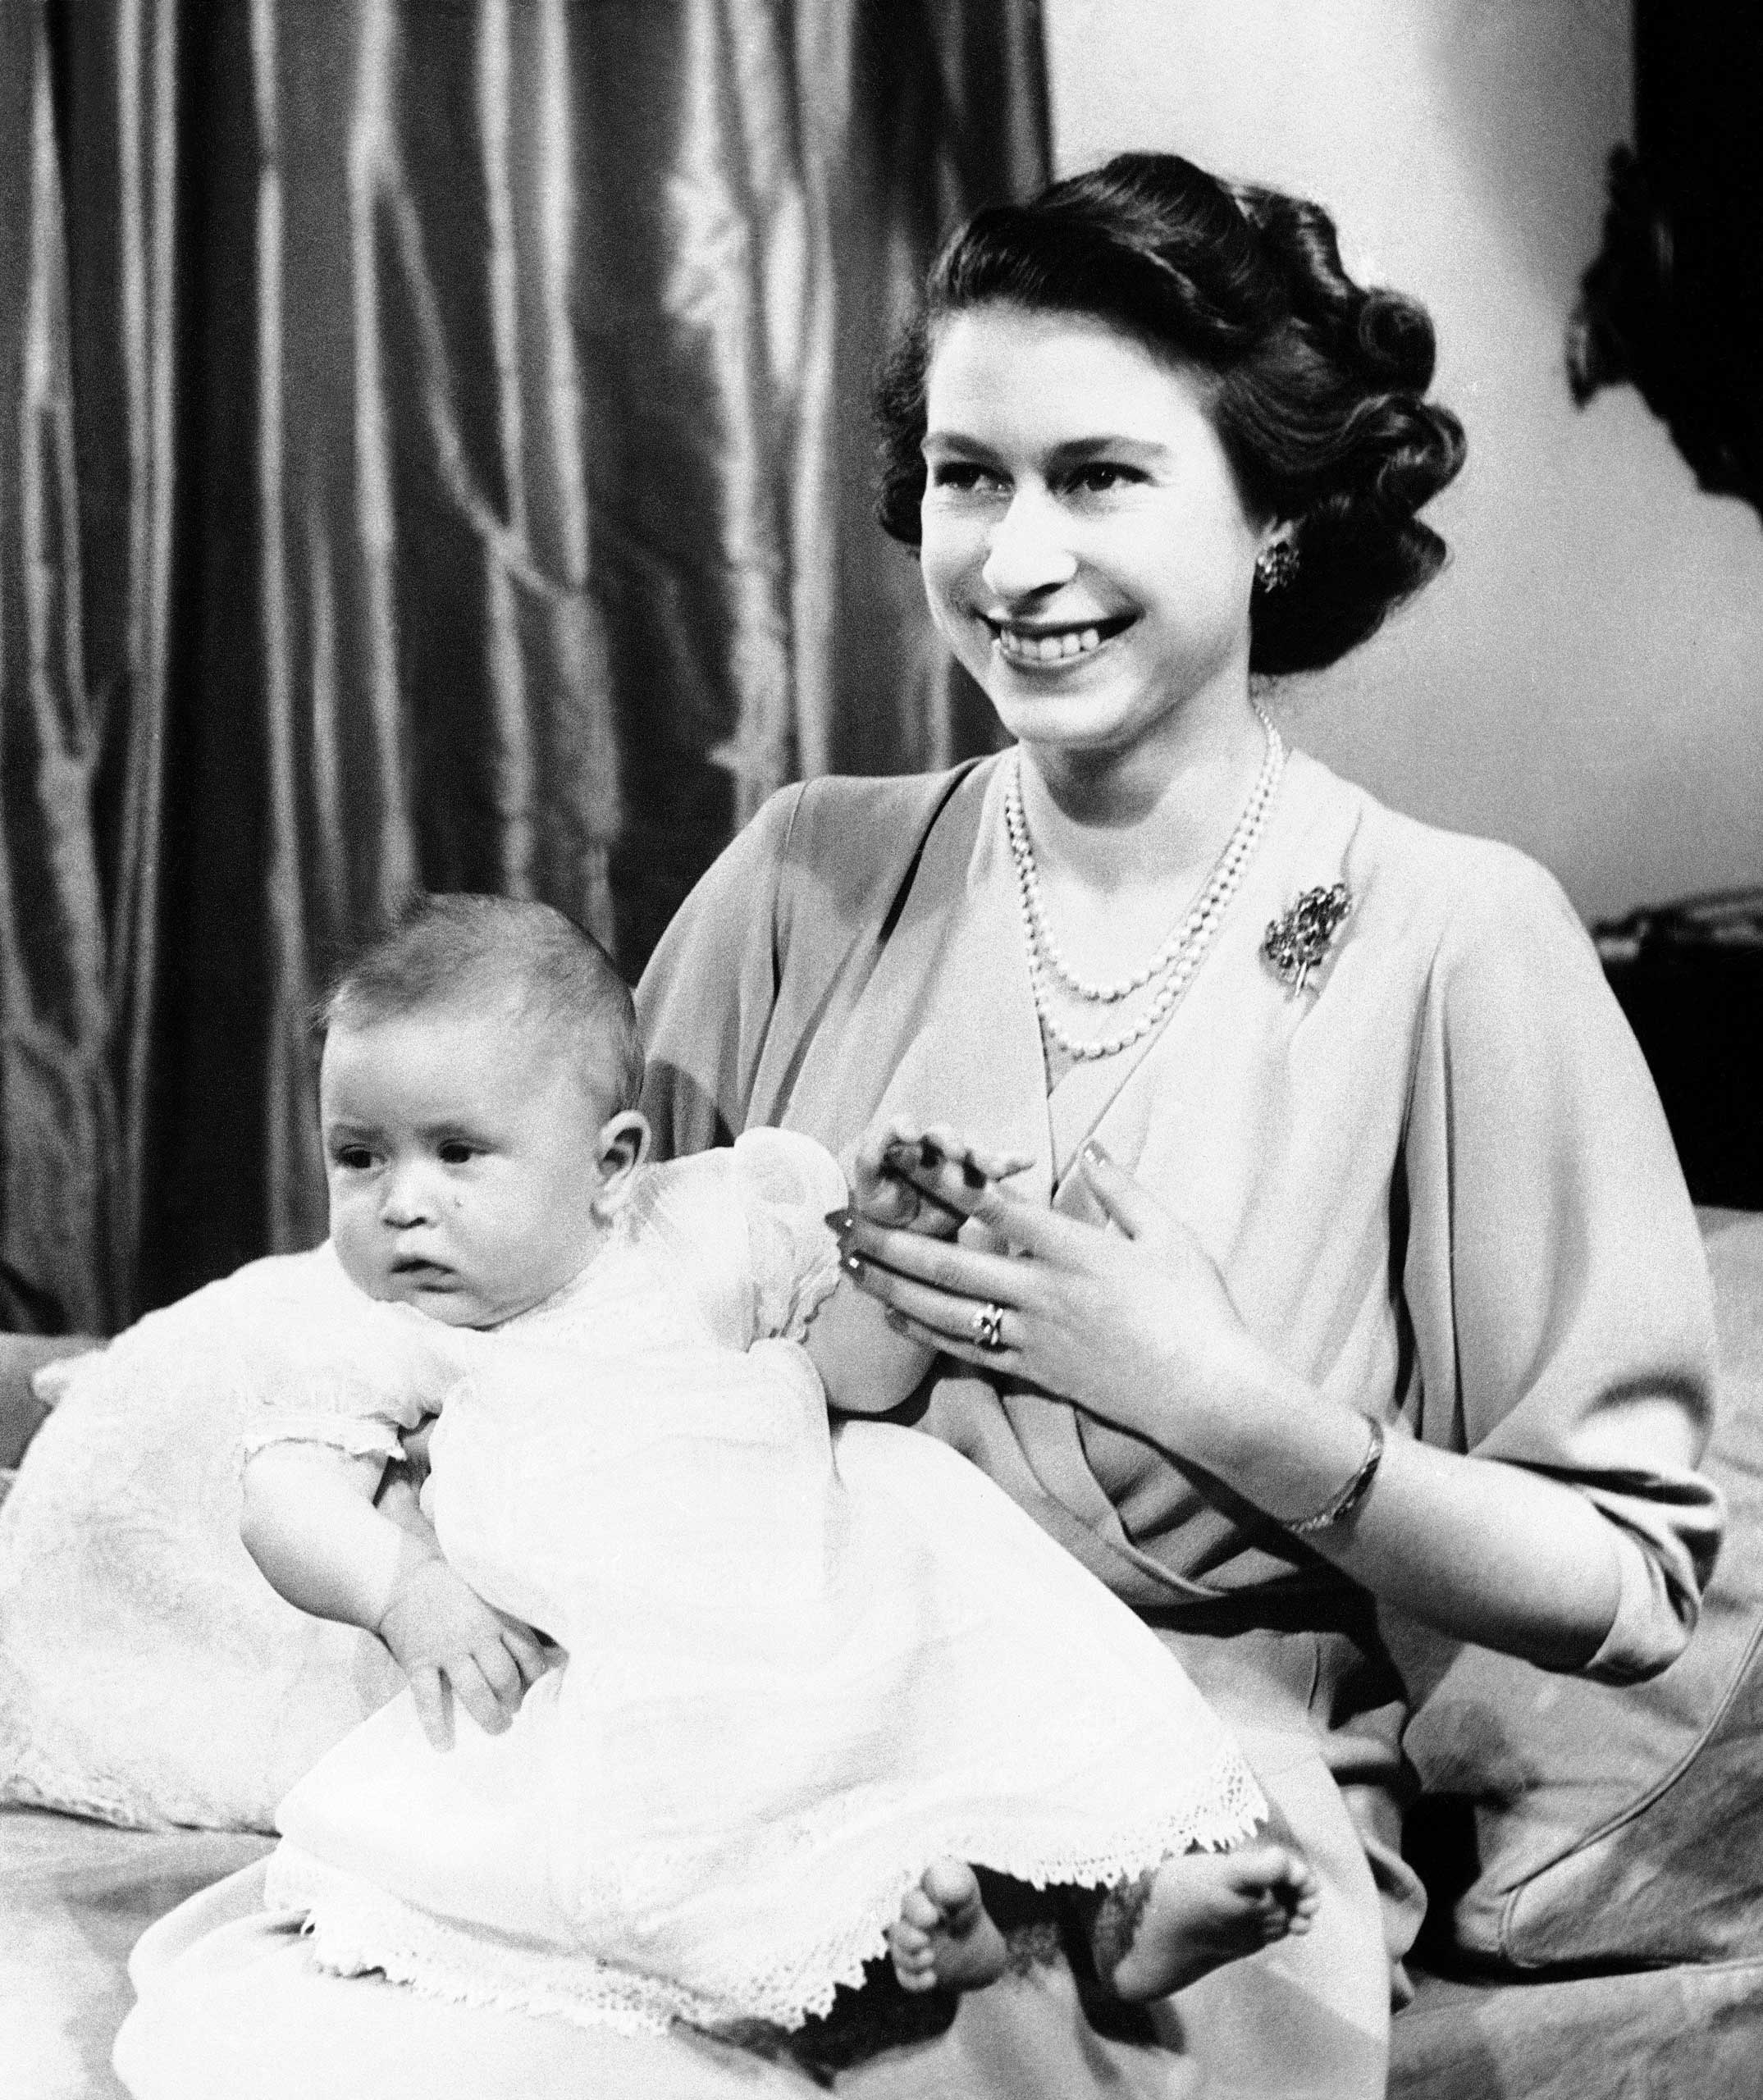 Before Princes Charles was born in 1948, his grandfather King George VI did away with a long-held custom that demanded the Home Secretary be present at royal births. Here Charles is pictured with his mother, at that stage still Princess Elizabeth.